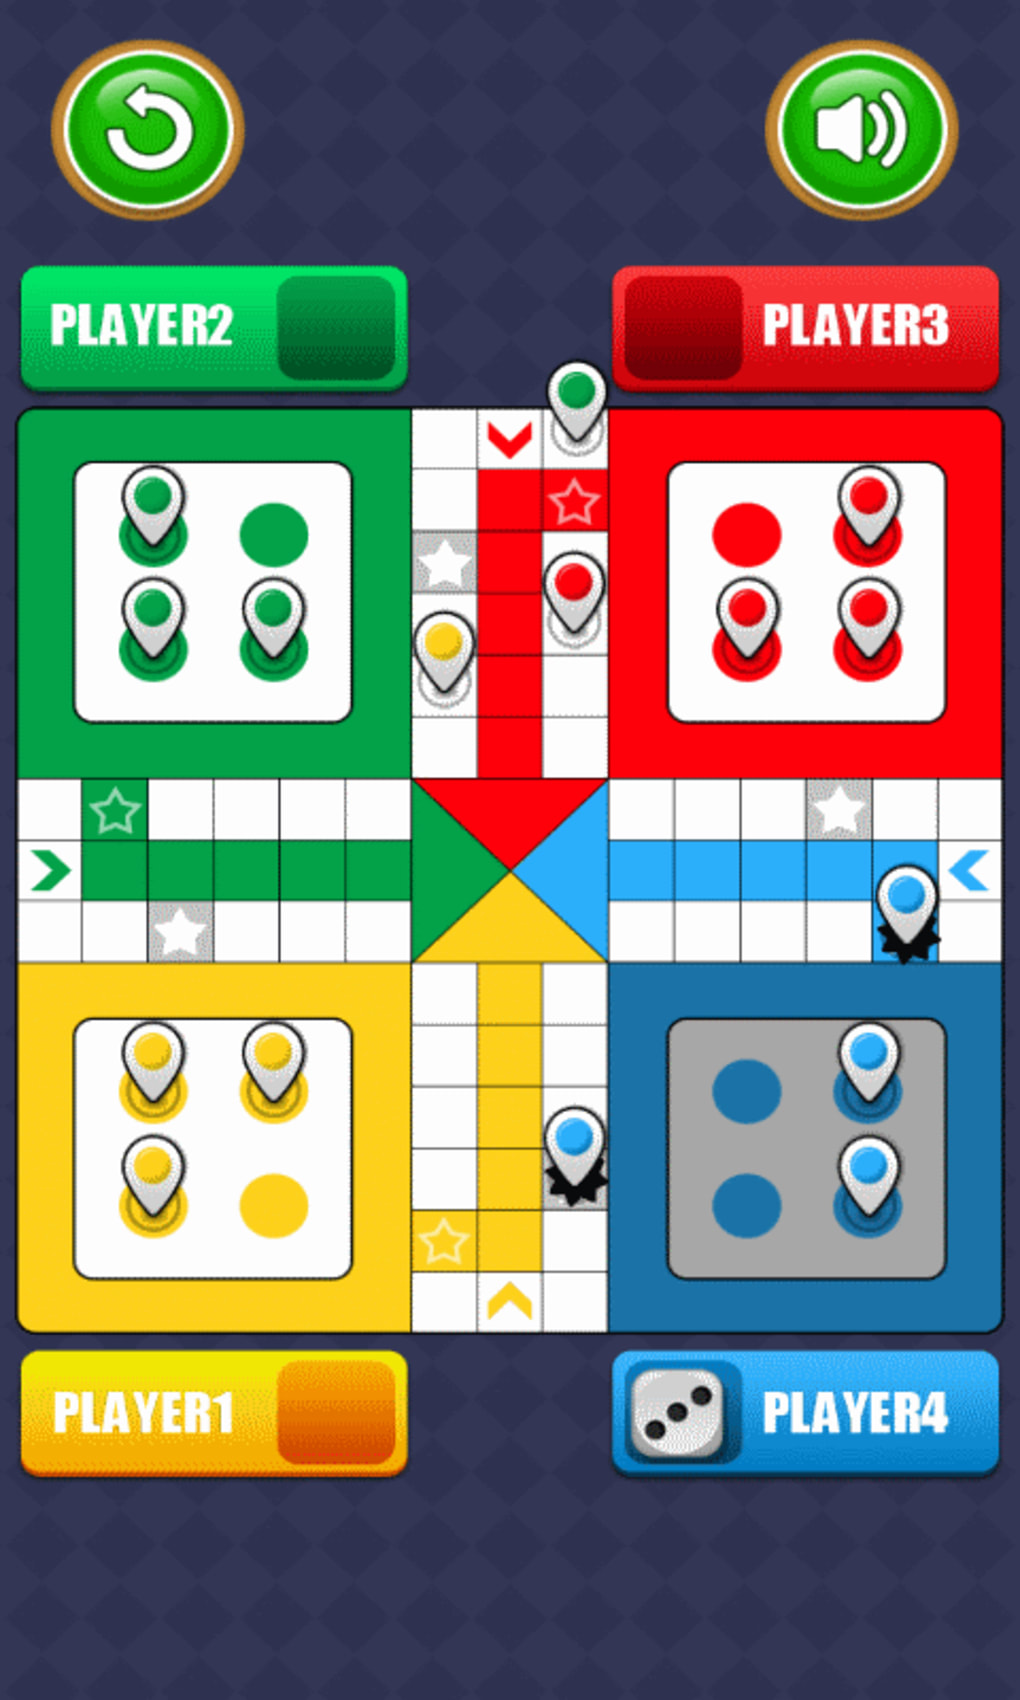 Ludo King™ - APK Download for Android